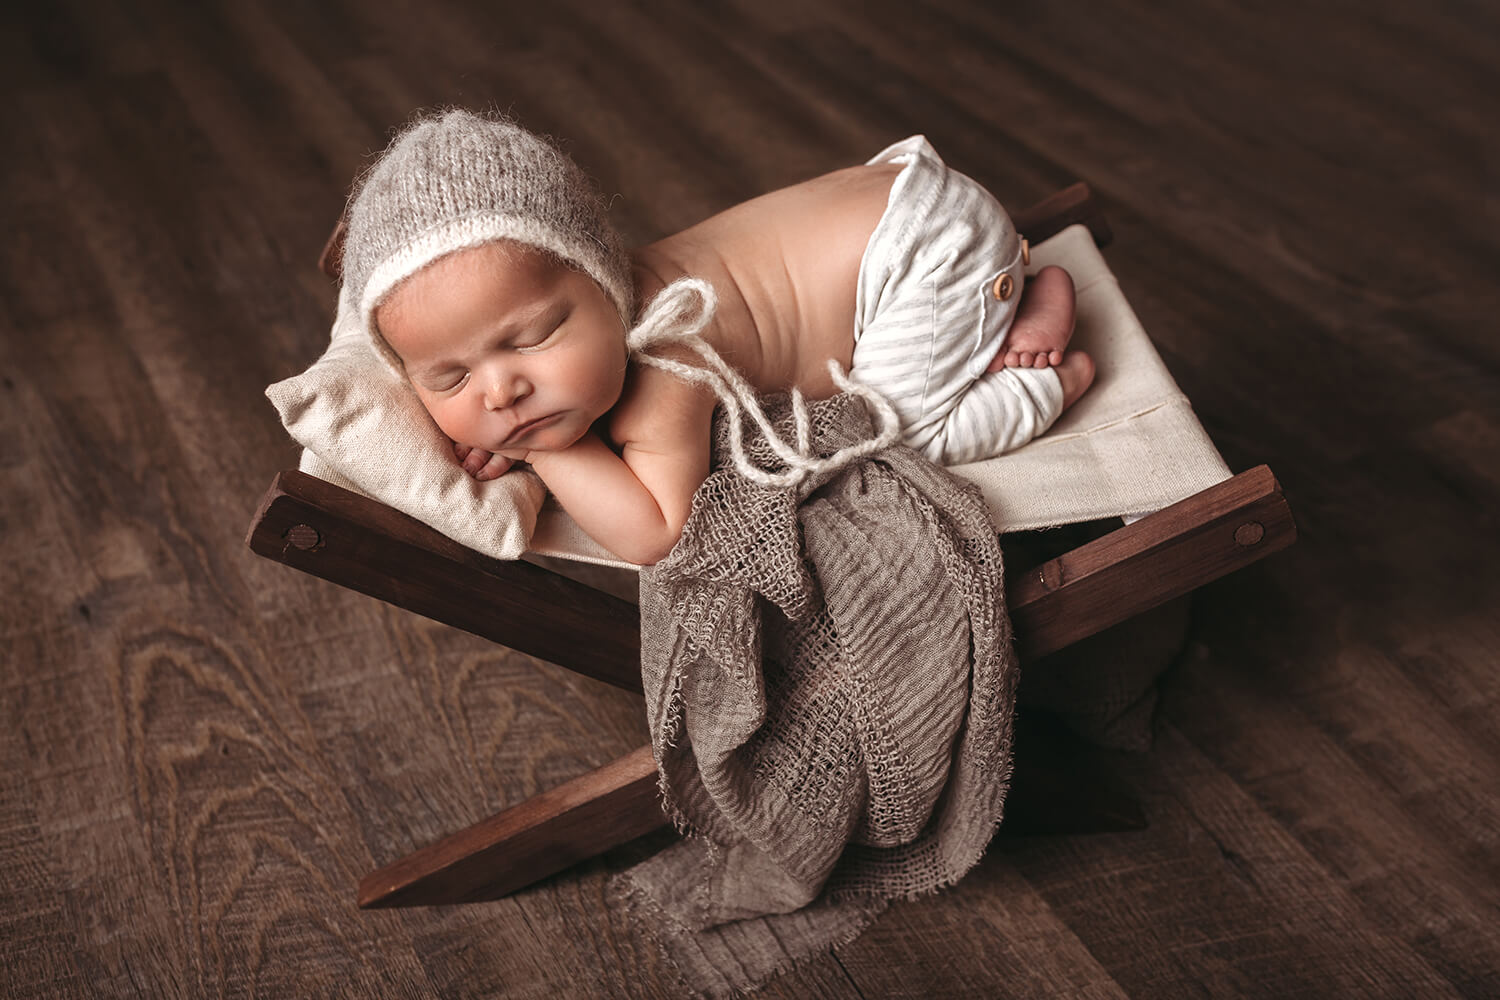 Photo of baby sleeping on a chair with blanket and bonnet.